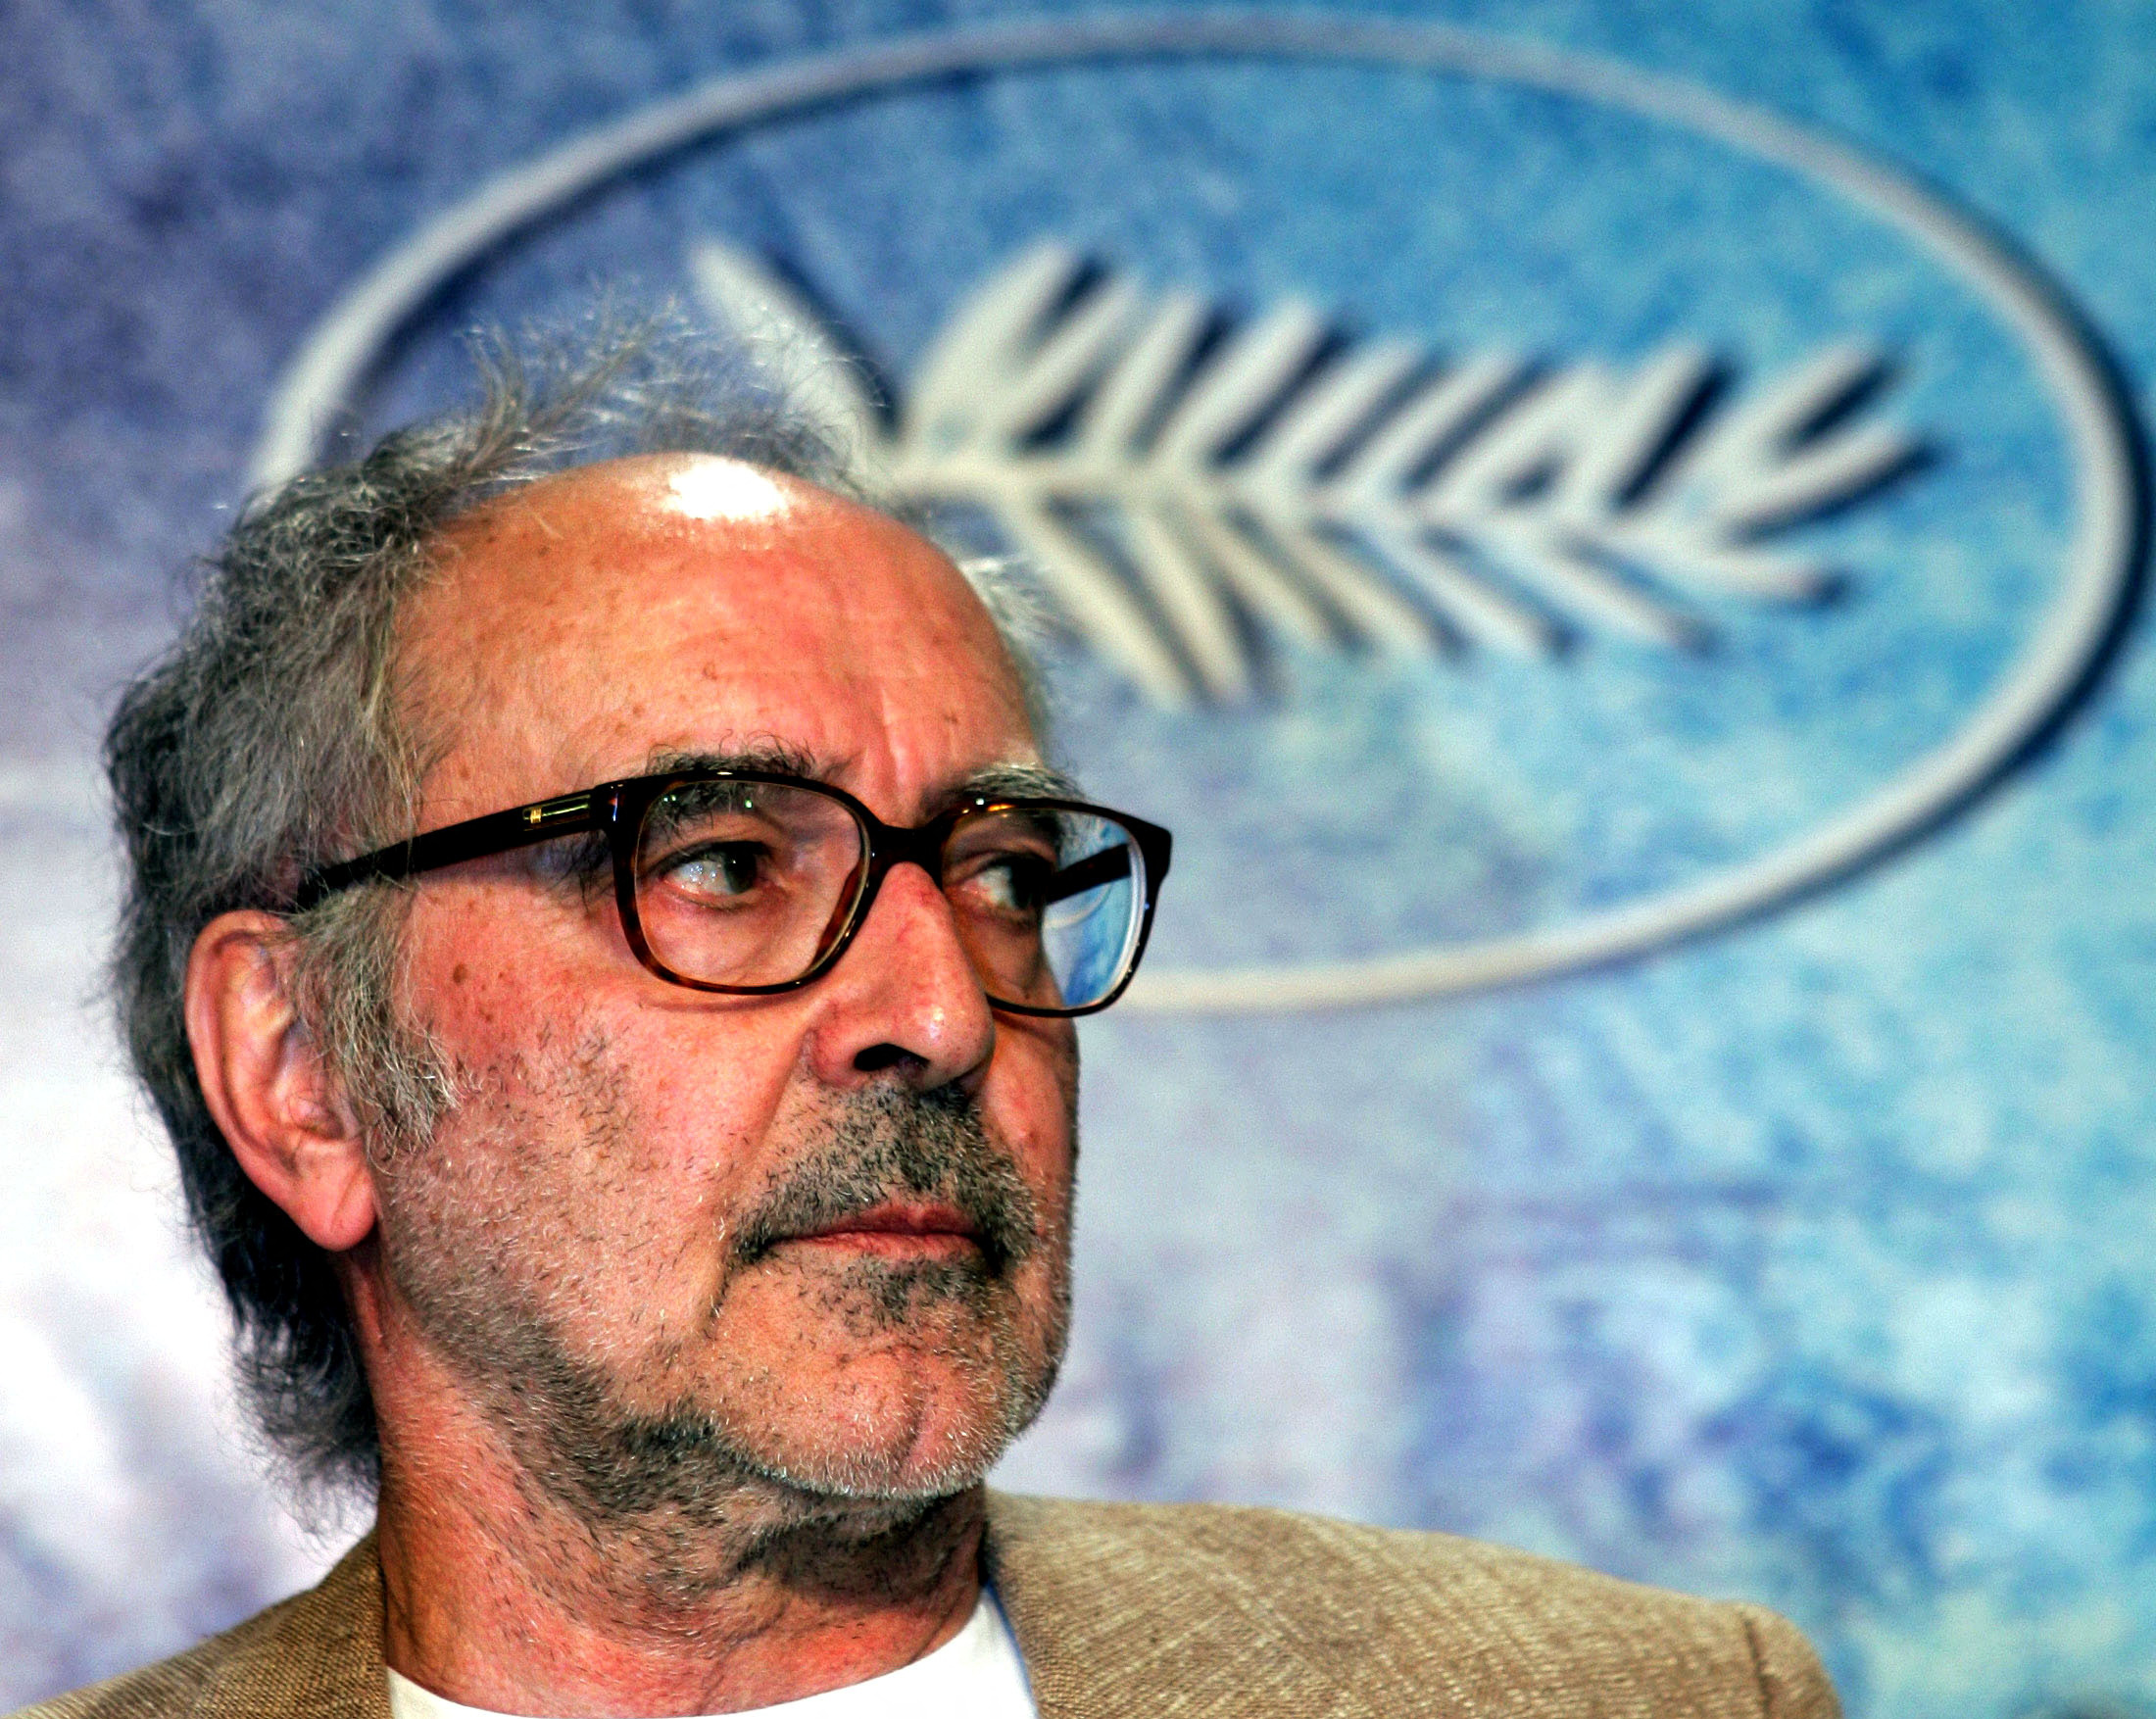 French-Swiss DIRECTOR GODARD ATTENDS PRESS CONFERENCE FOR 'NOTRE MUSIQUE' AT 57TH CANNES FILM FESTIVAL.